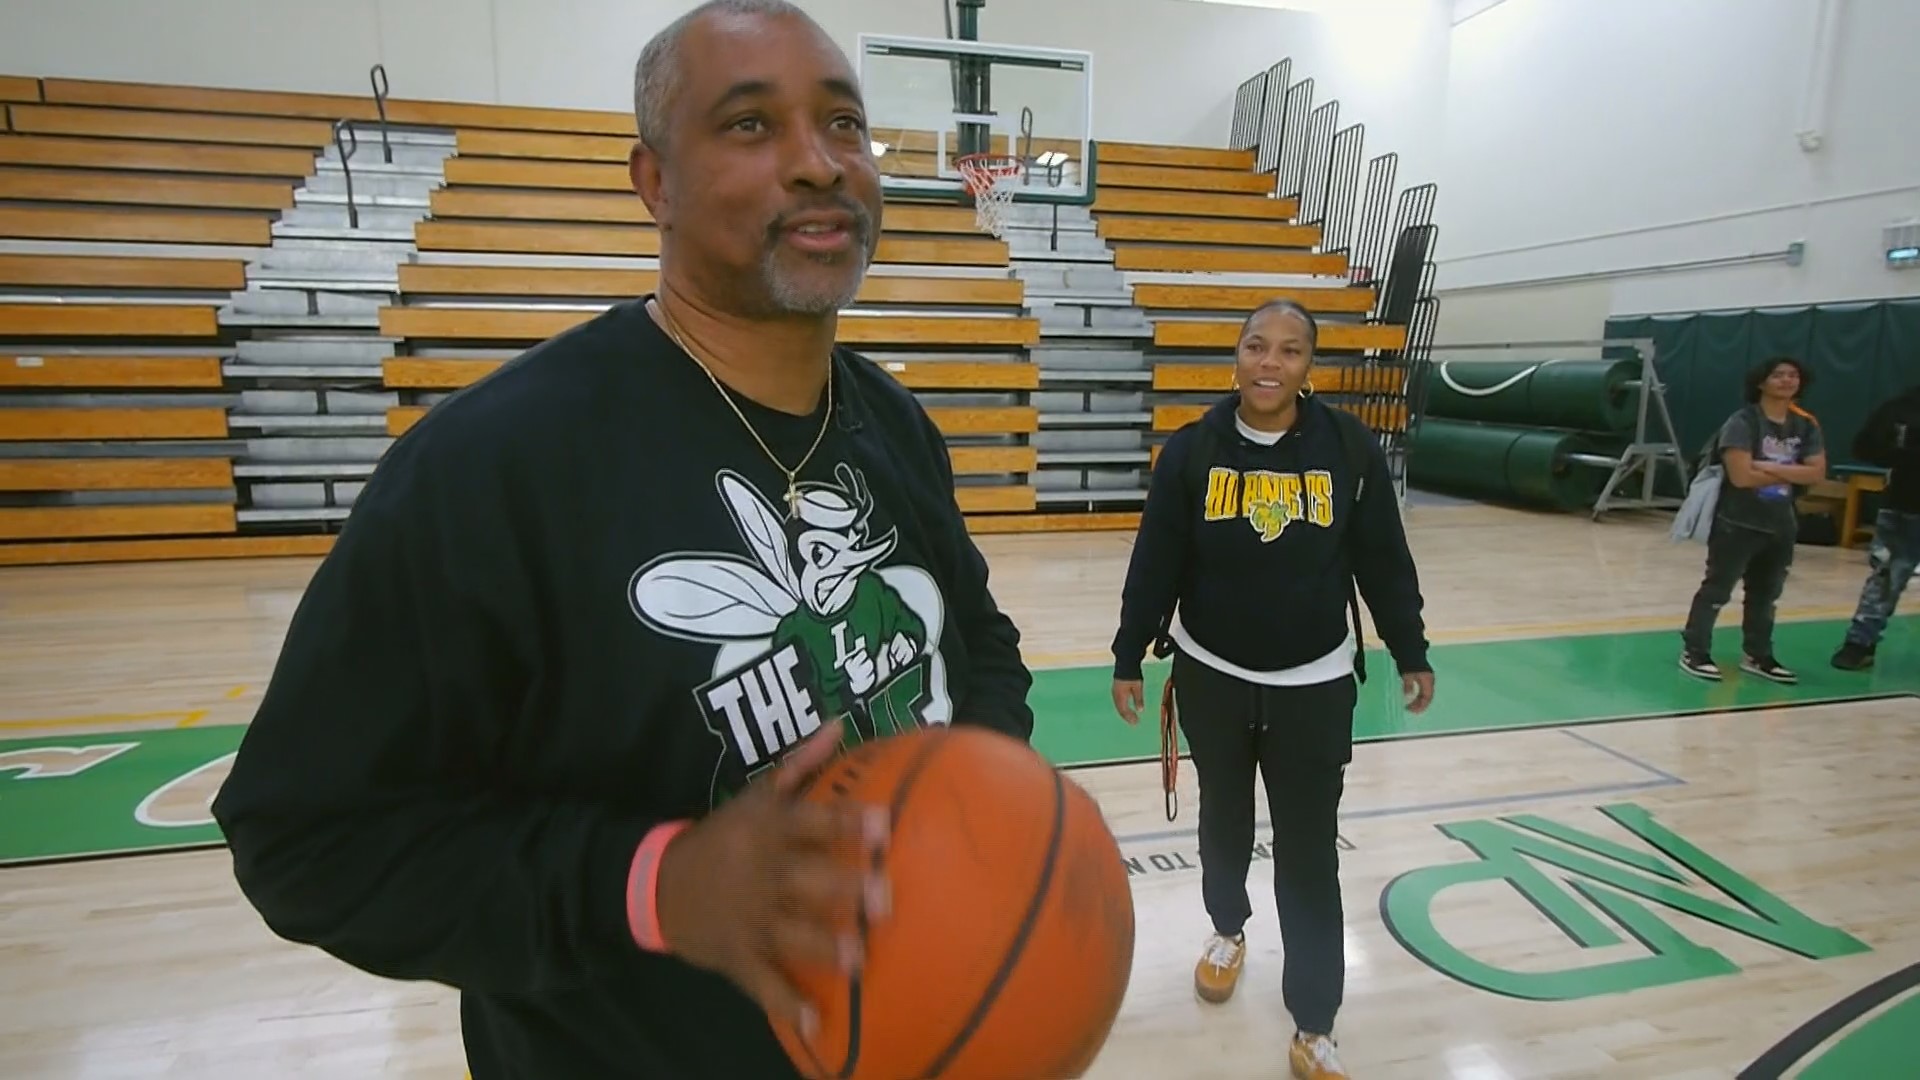 Lincoln High's Head Basketball coach Jeff Harper-Harris has been more than just a basketball coach to the community of Southeast San Diego.